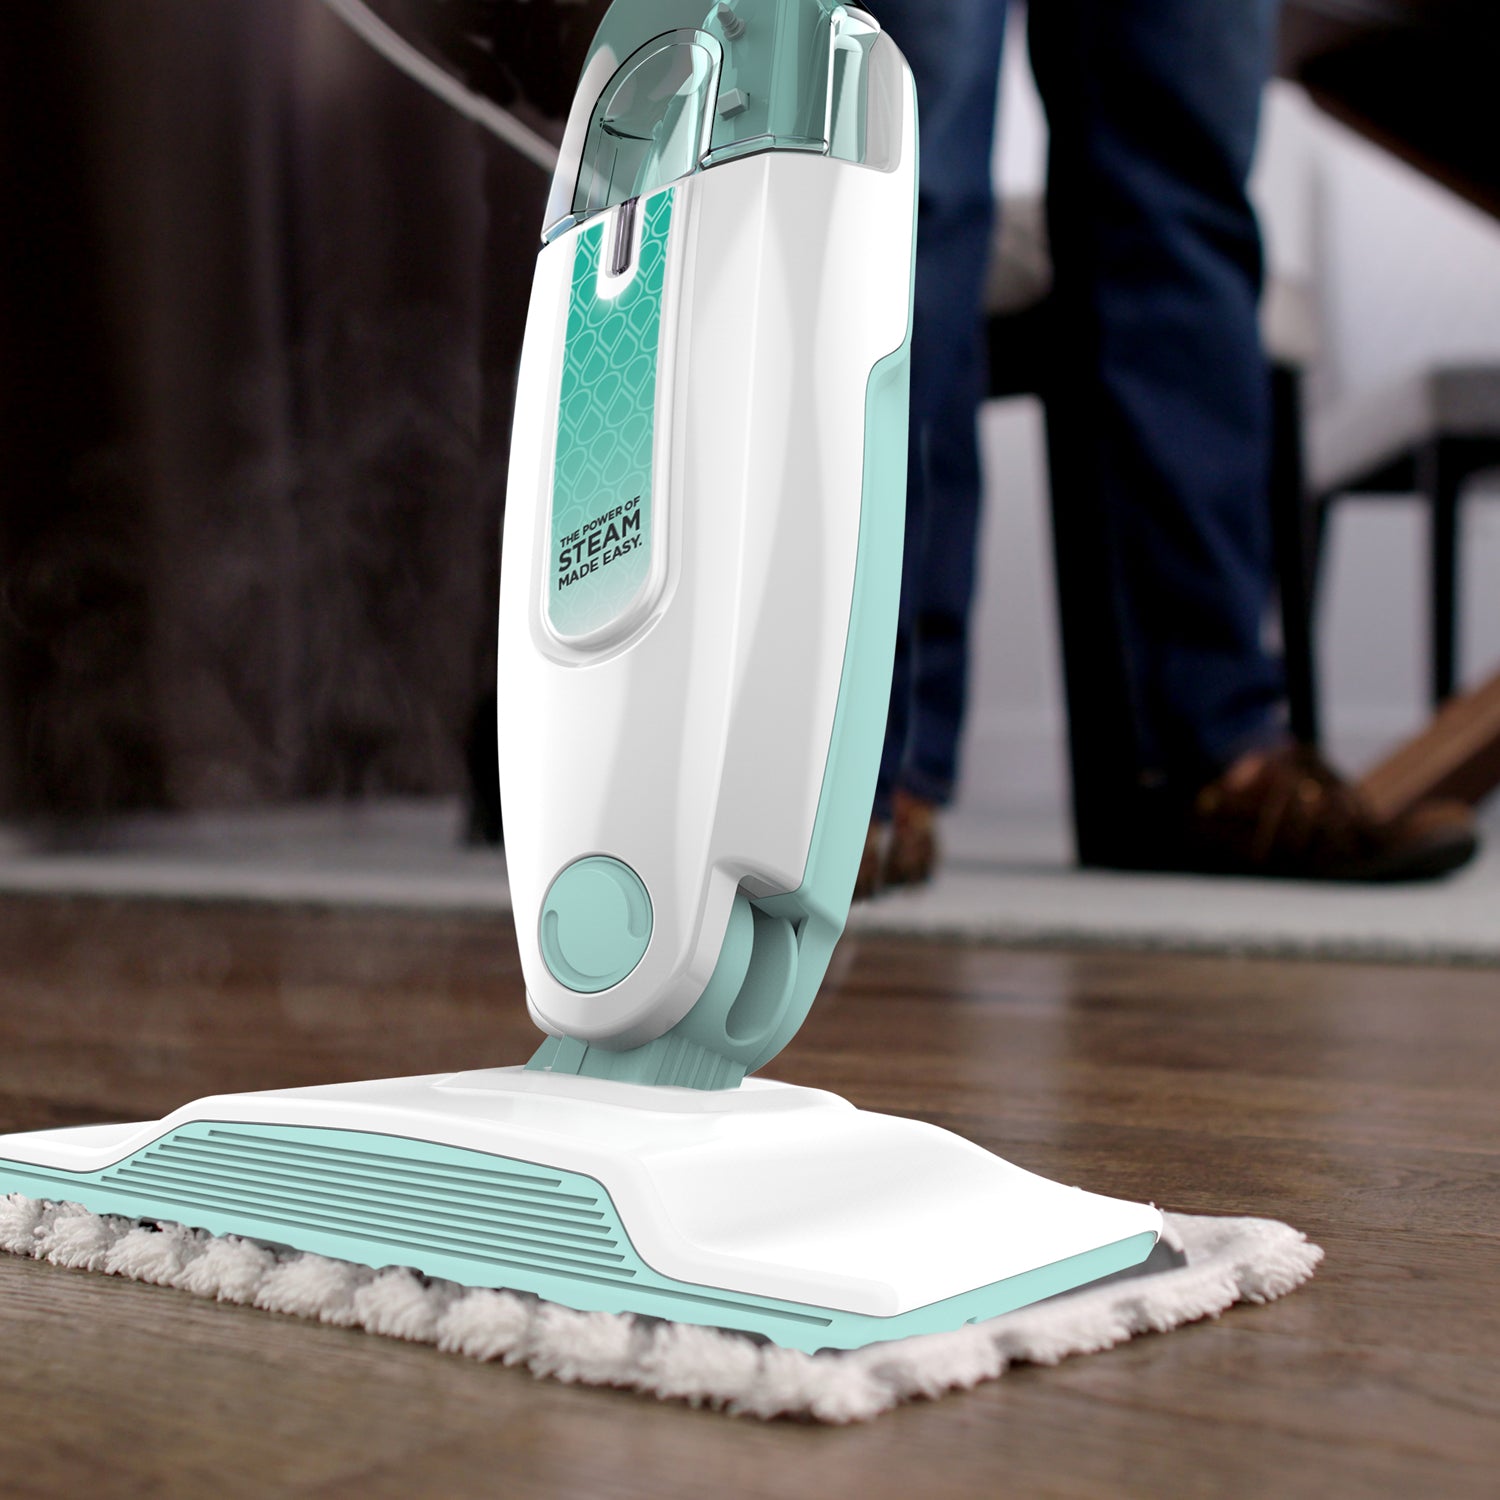 image 7 of Shark® Steam Mop Hard Floor Cleaner With XL Removable Water Tank S1000WM